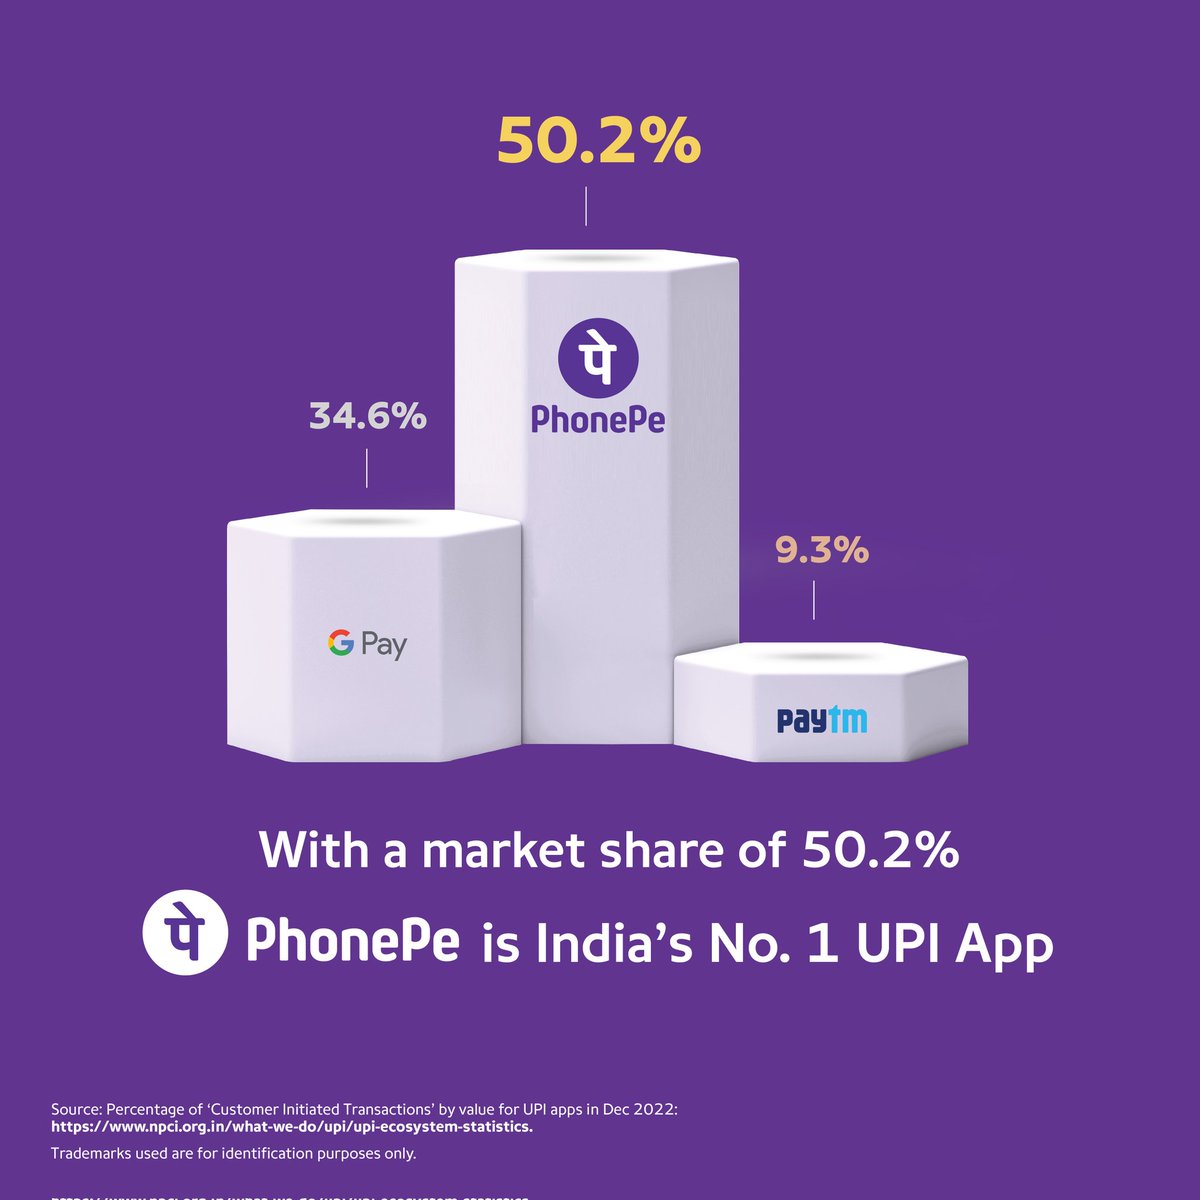 With a 50.2% market share, PhonePe is the No.1 UPI app in India. Thank you for every moment you’ve trusted us. #PhonePeNo1UPIApp Source: bitly.ws/zQLh